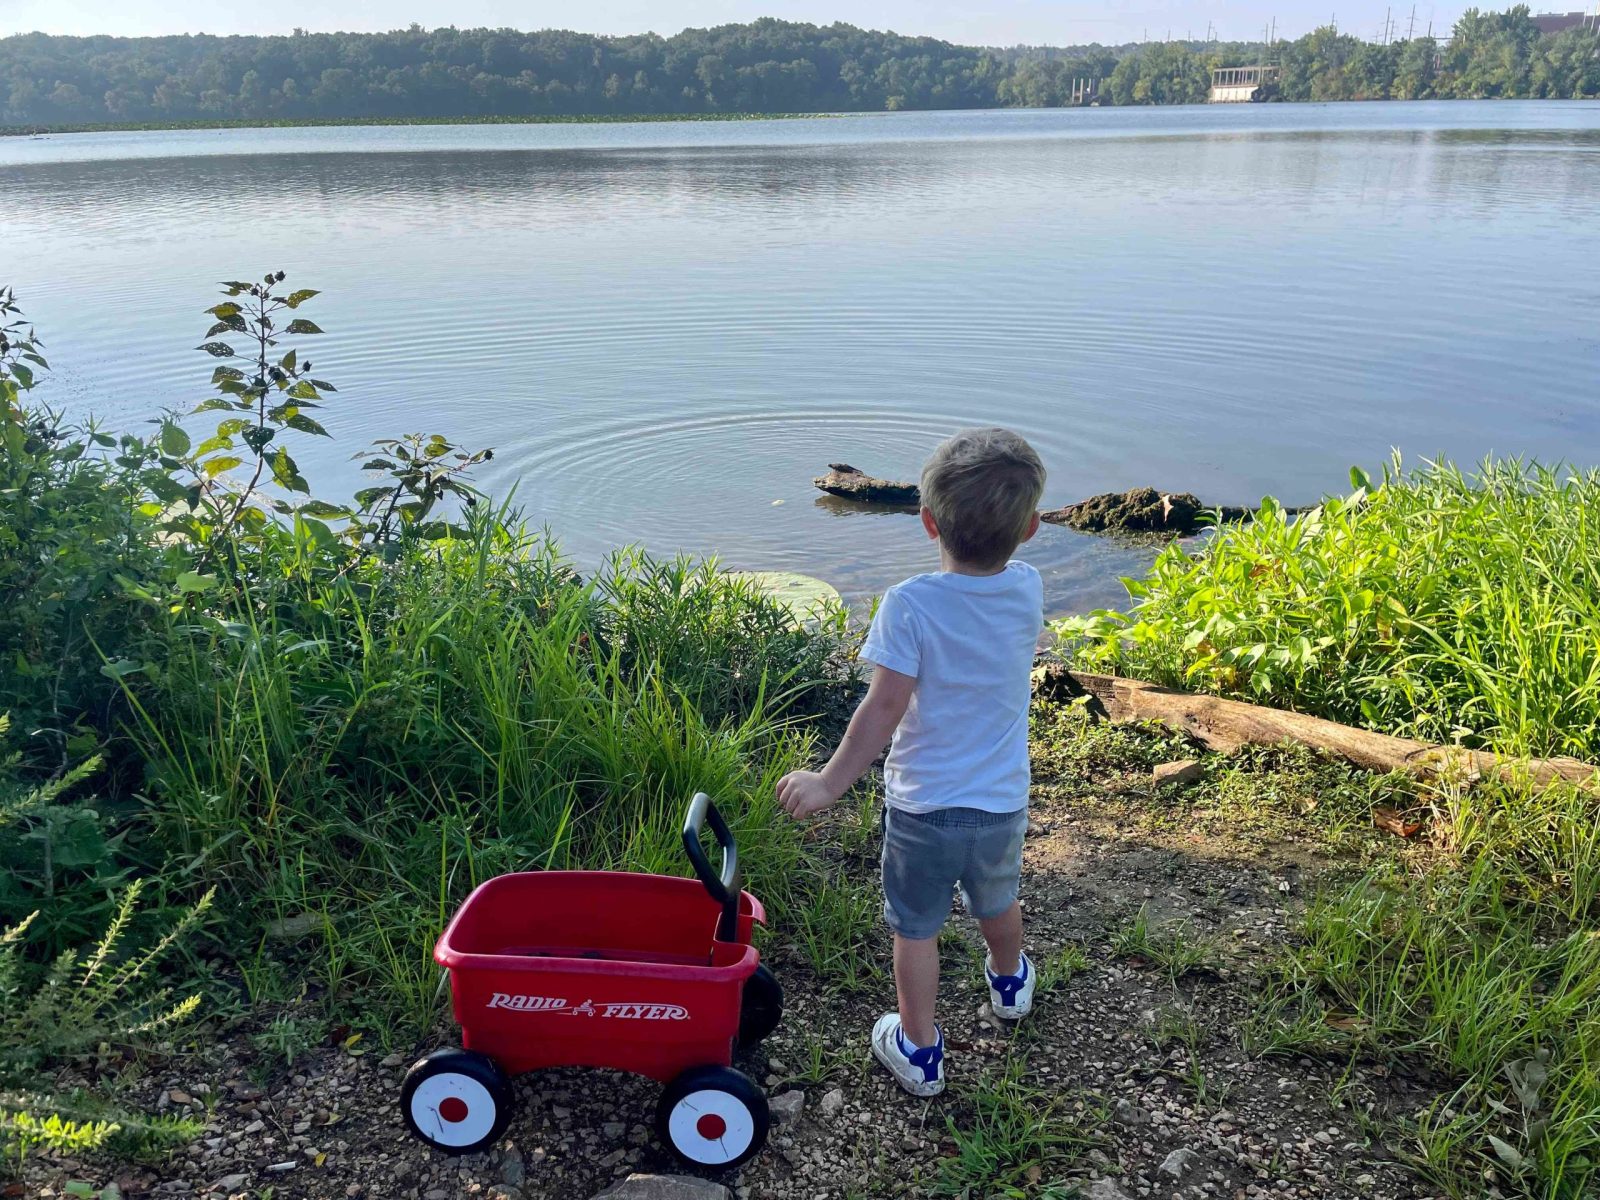 A young boy pulling a red wagon stands next to Lake Springfield